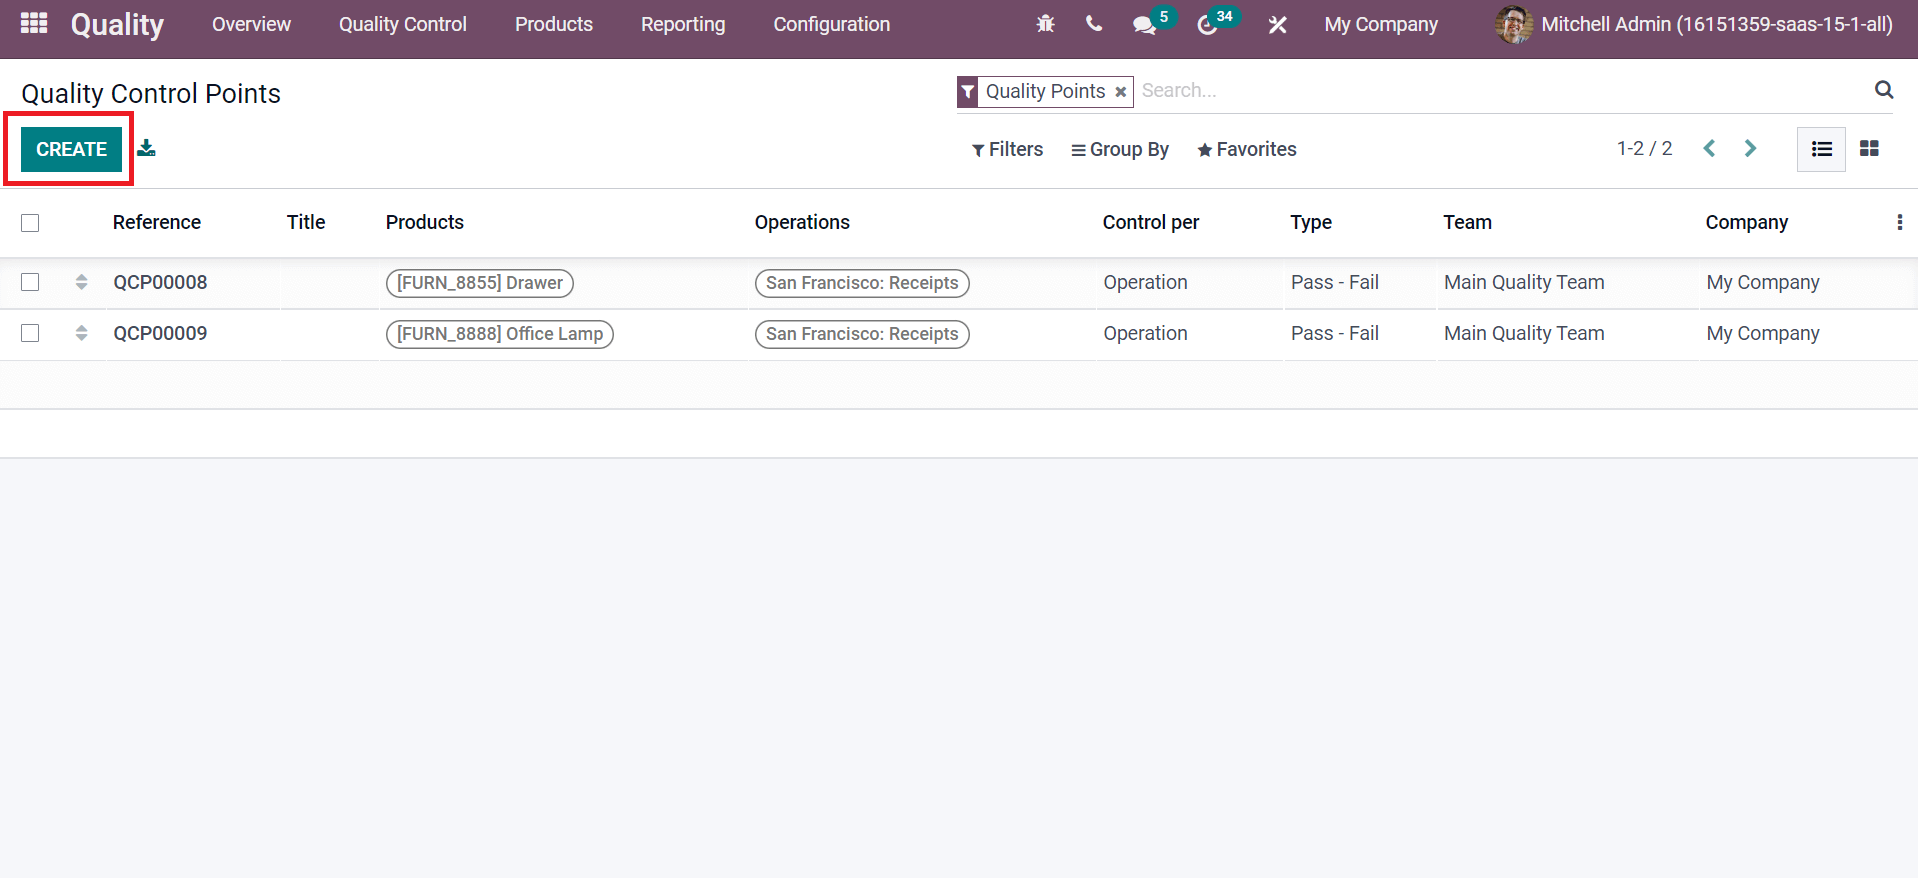 invoice-integration-in-odoo-15-accounting-sales-modules-cybrosys